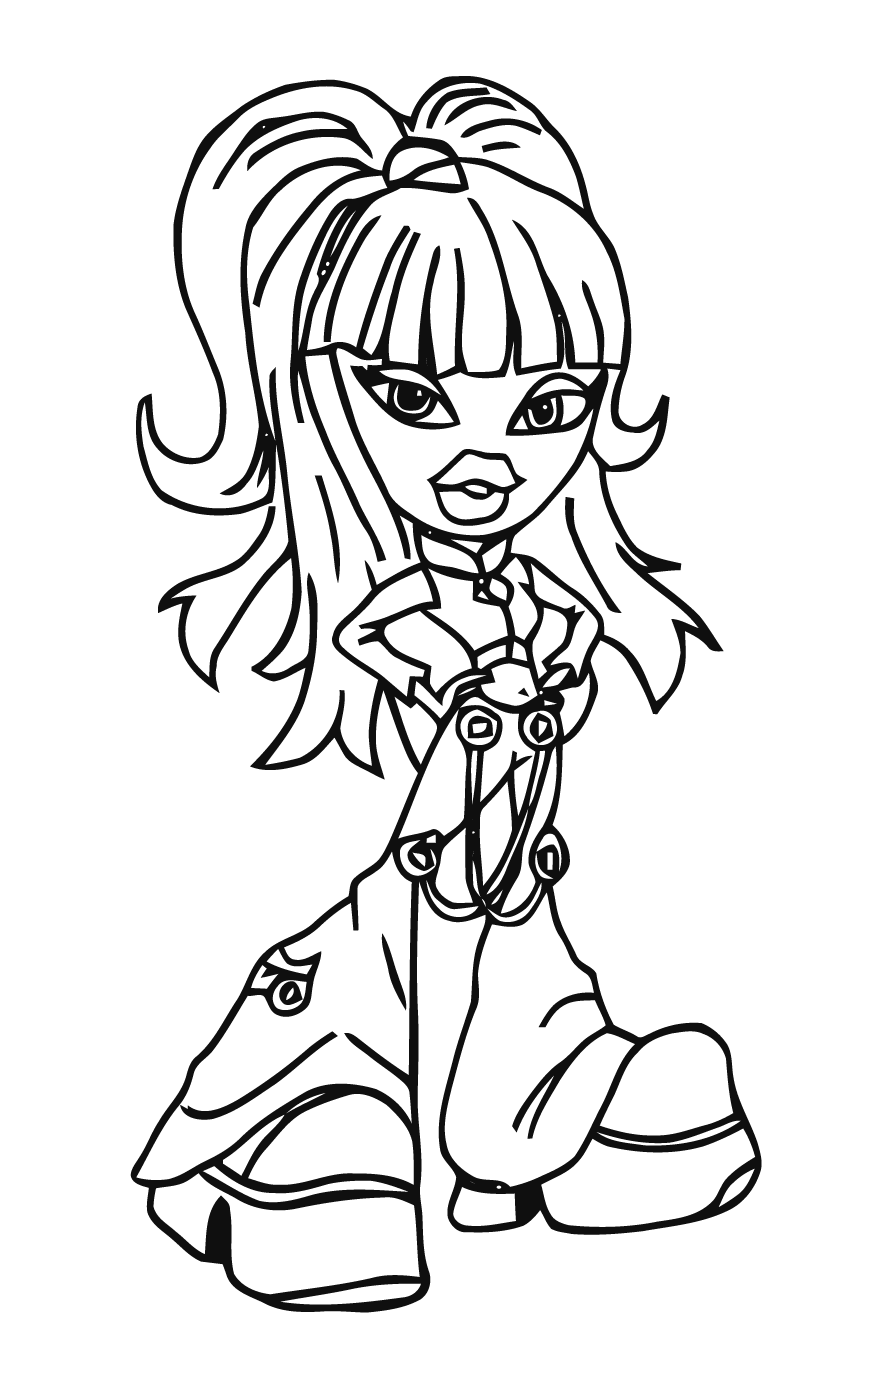 Drawing of a Bratz doll to print and color